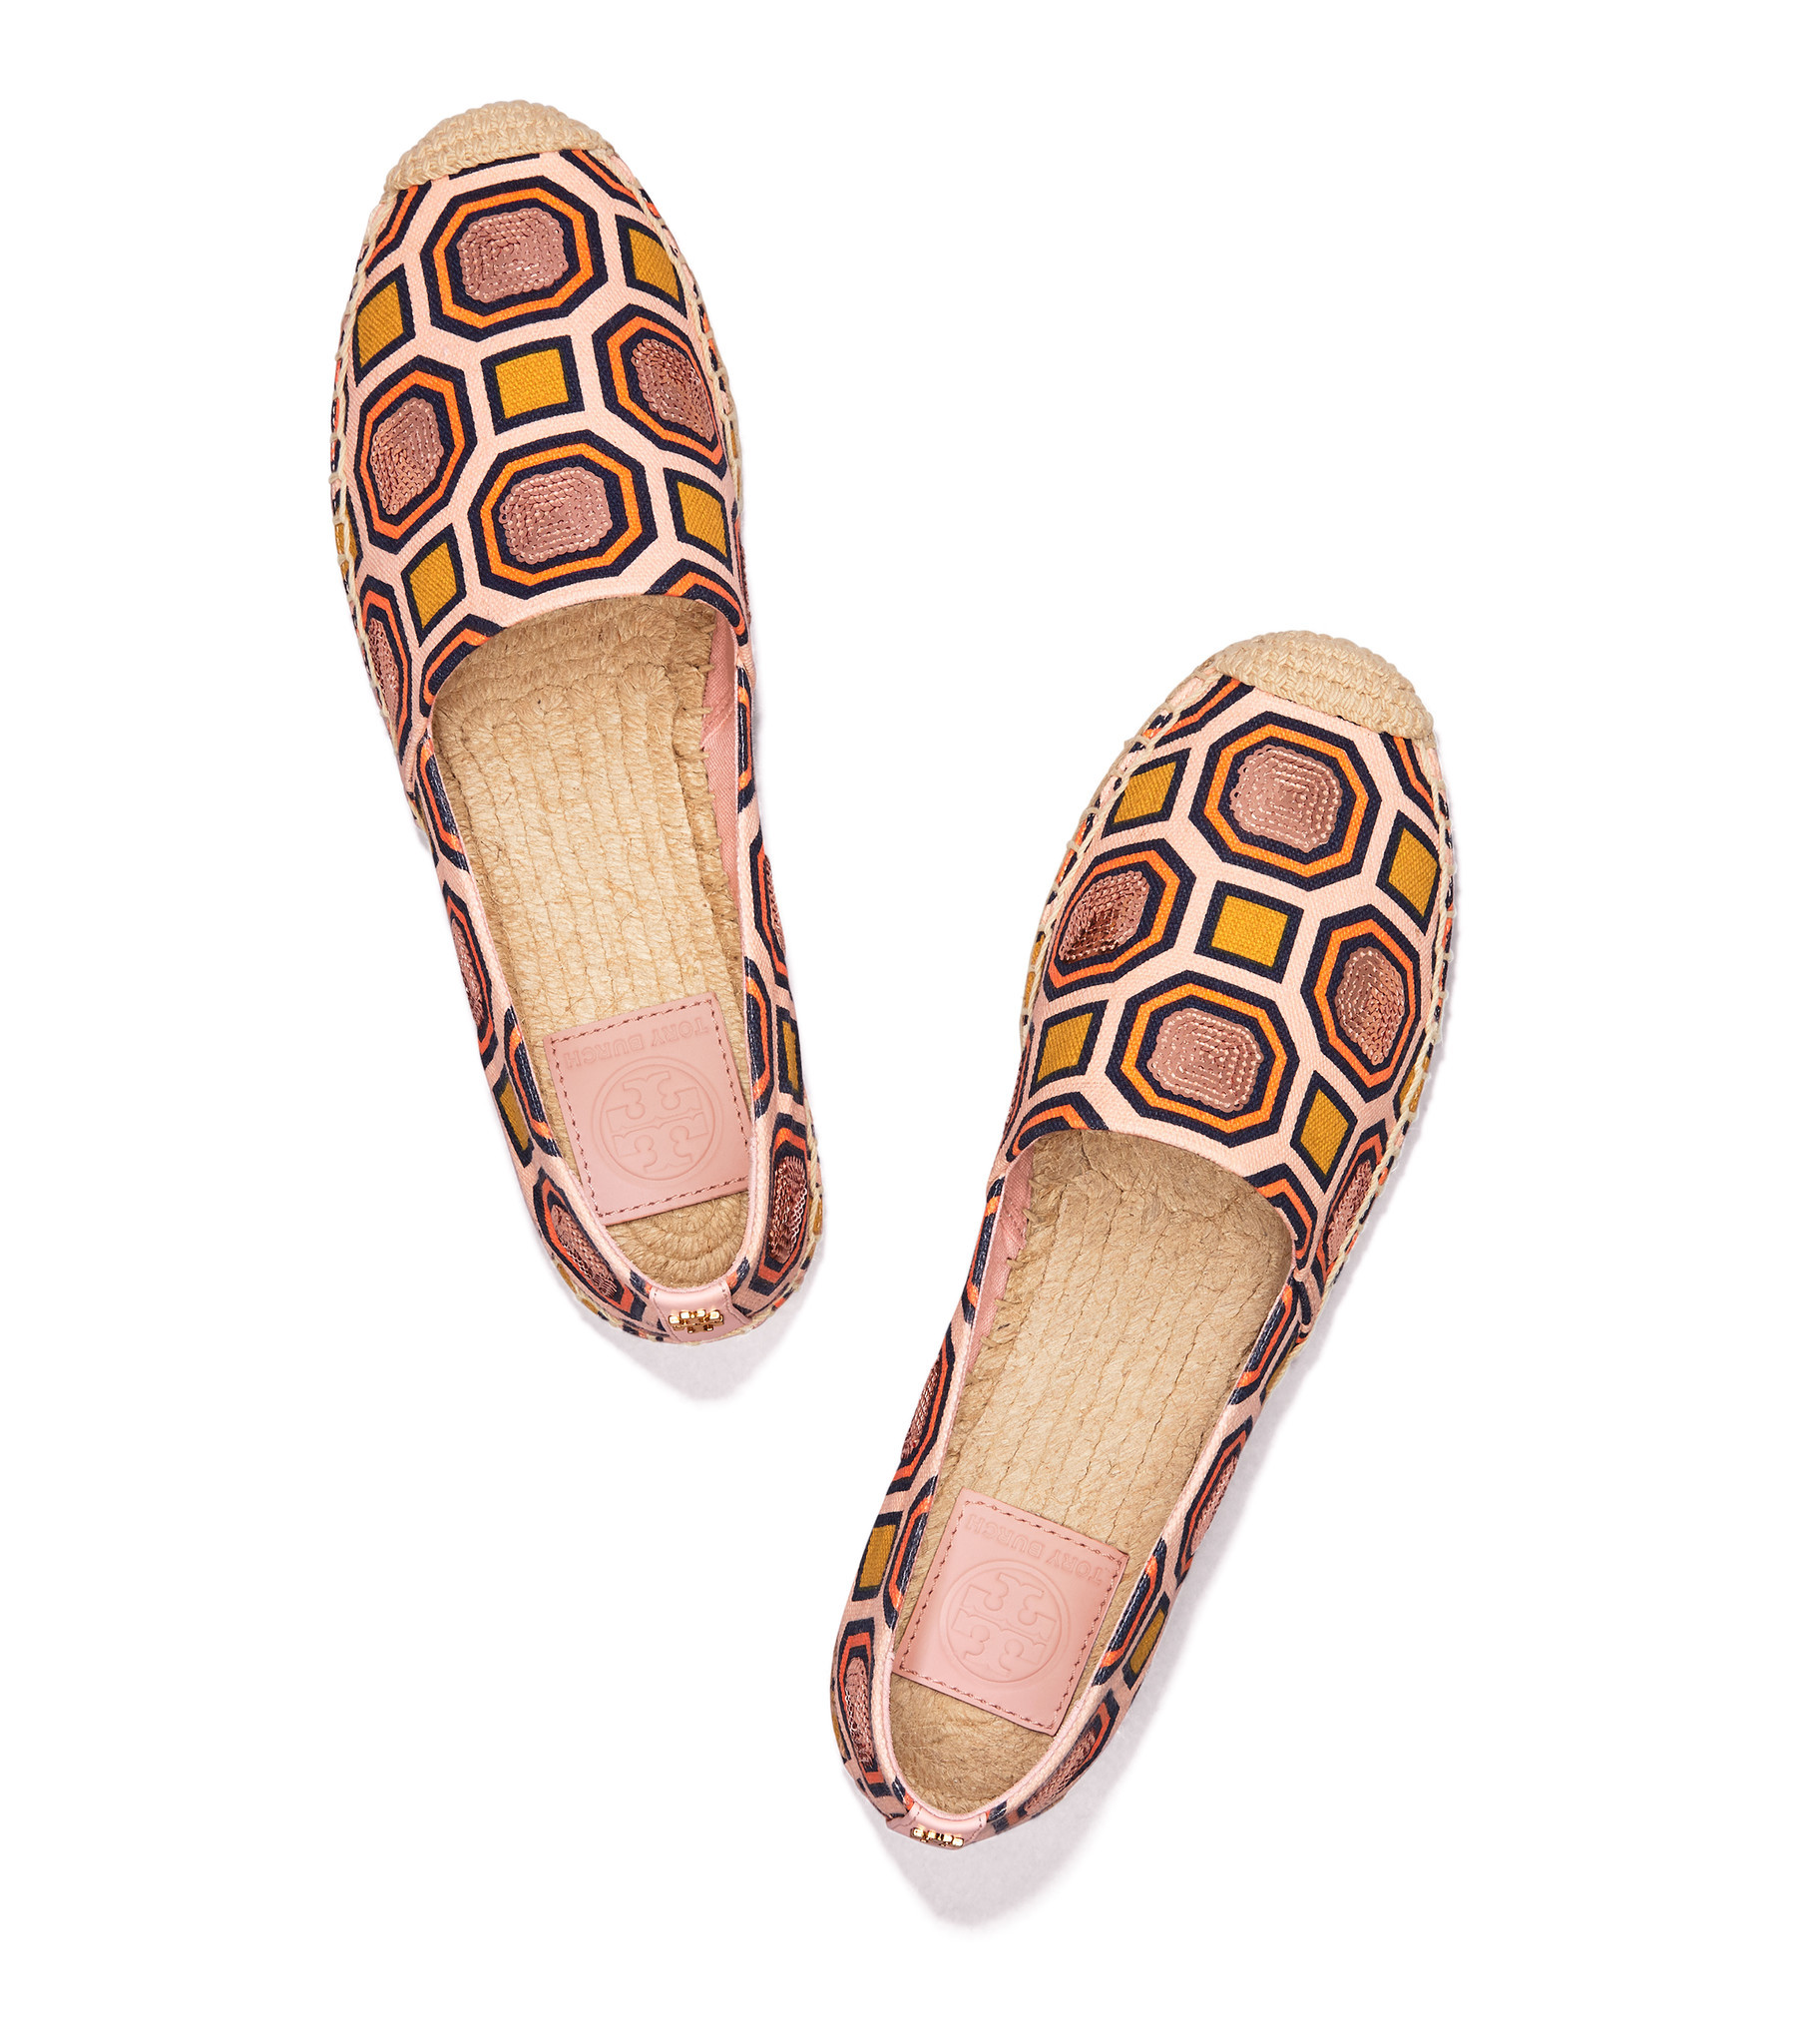 Tory Burch’s Cecily Embellished Espadrilles.